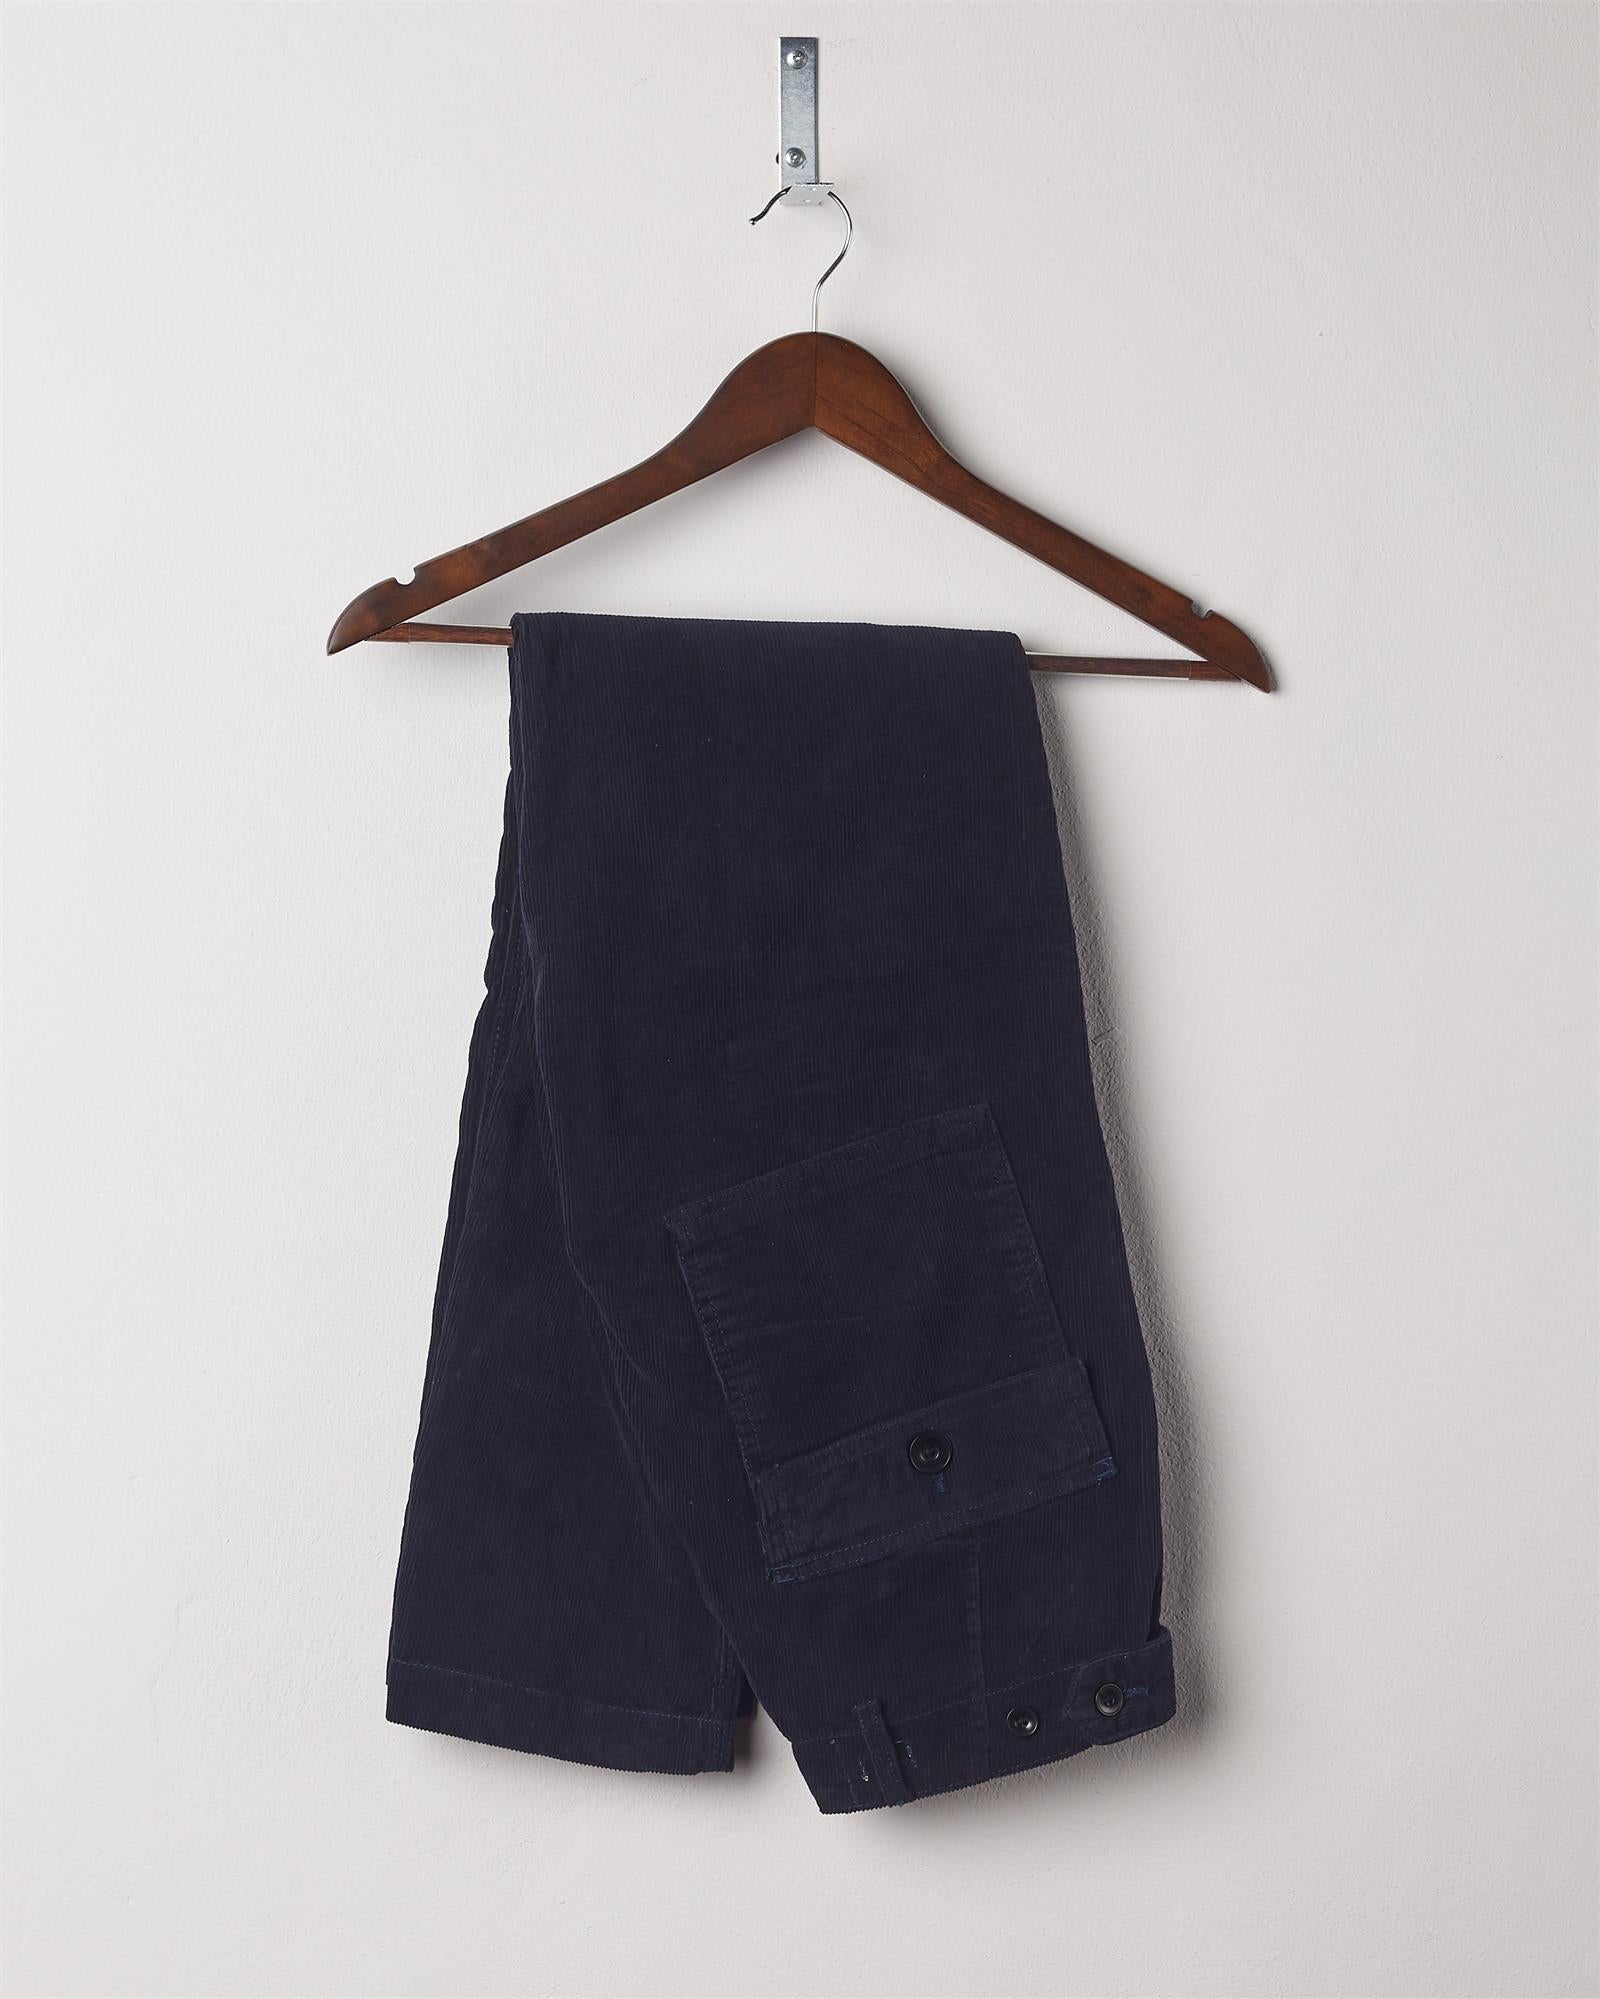 Folded hanging shot of #5005 Uskees men's organic cord 'midnight blue' casual trousers.